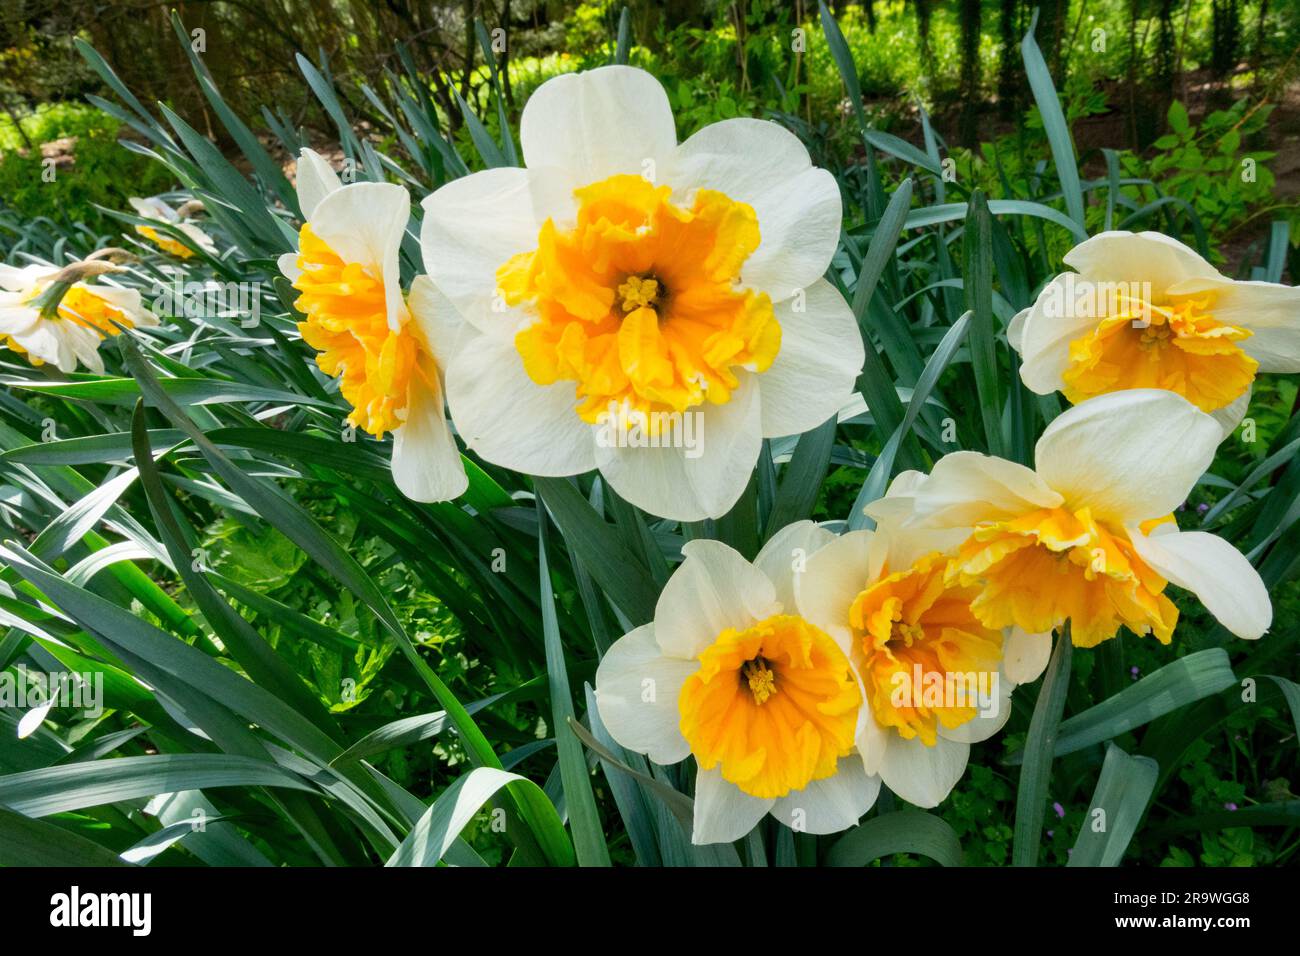 Split Cupped Collar, Narcissus Daffodils, Amaryllidaceae, Flowers, Spring Narcissus 'Dilemma' Stock Photo